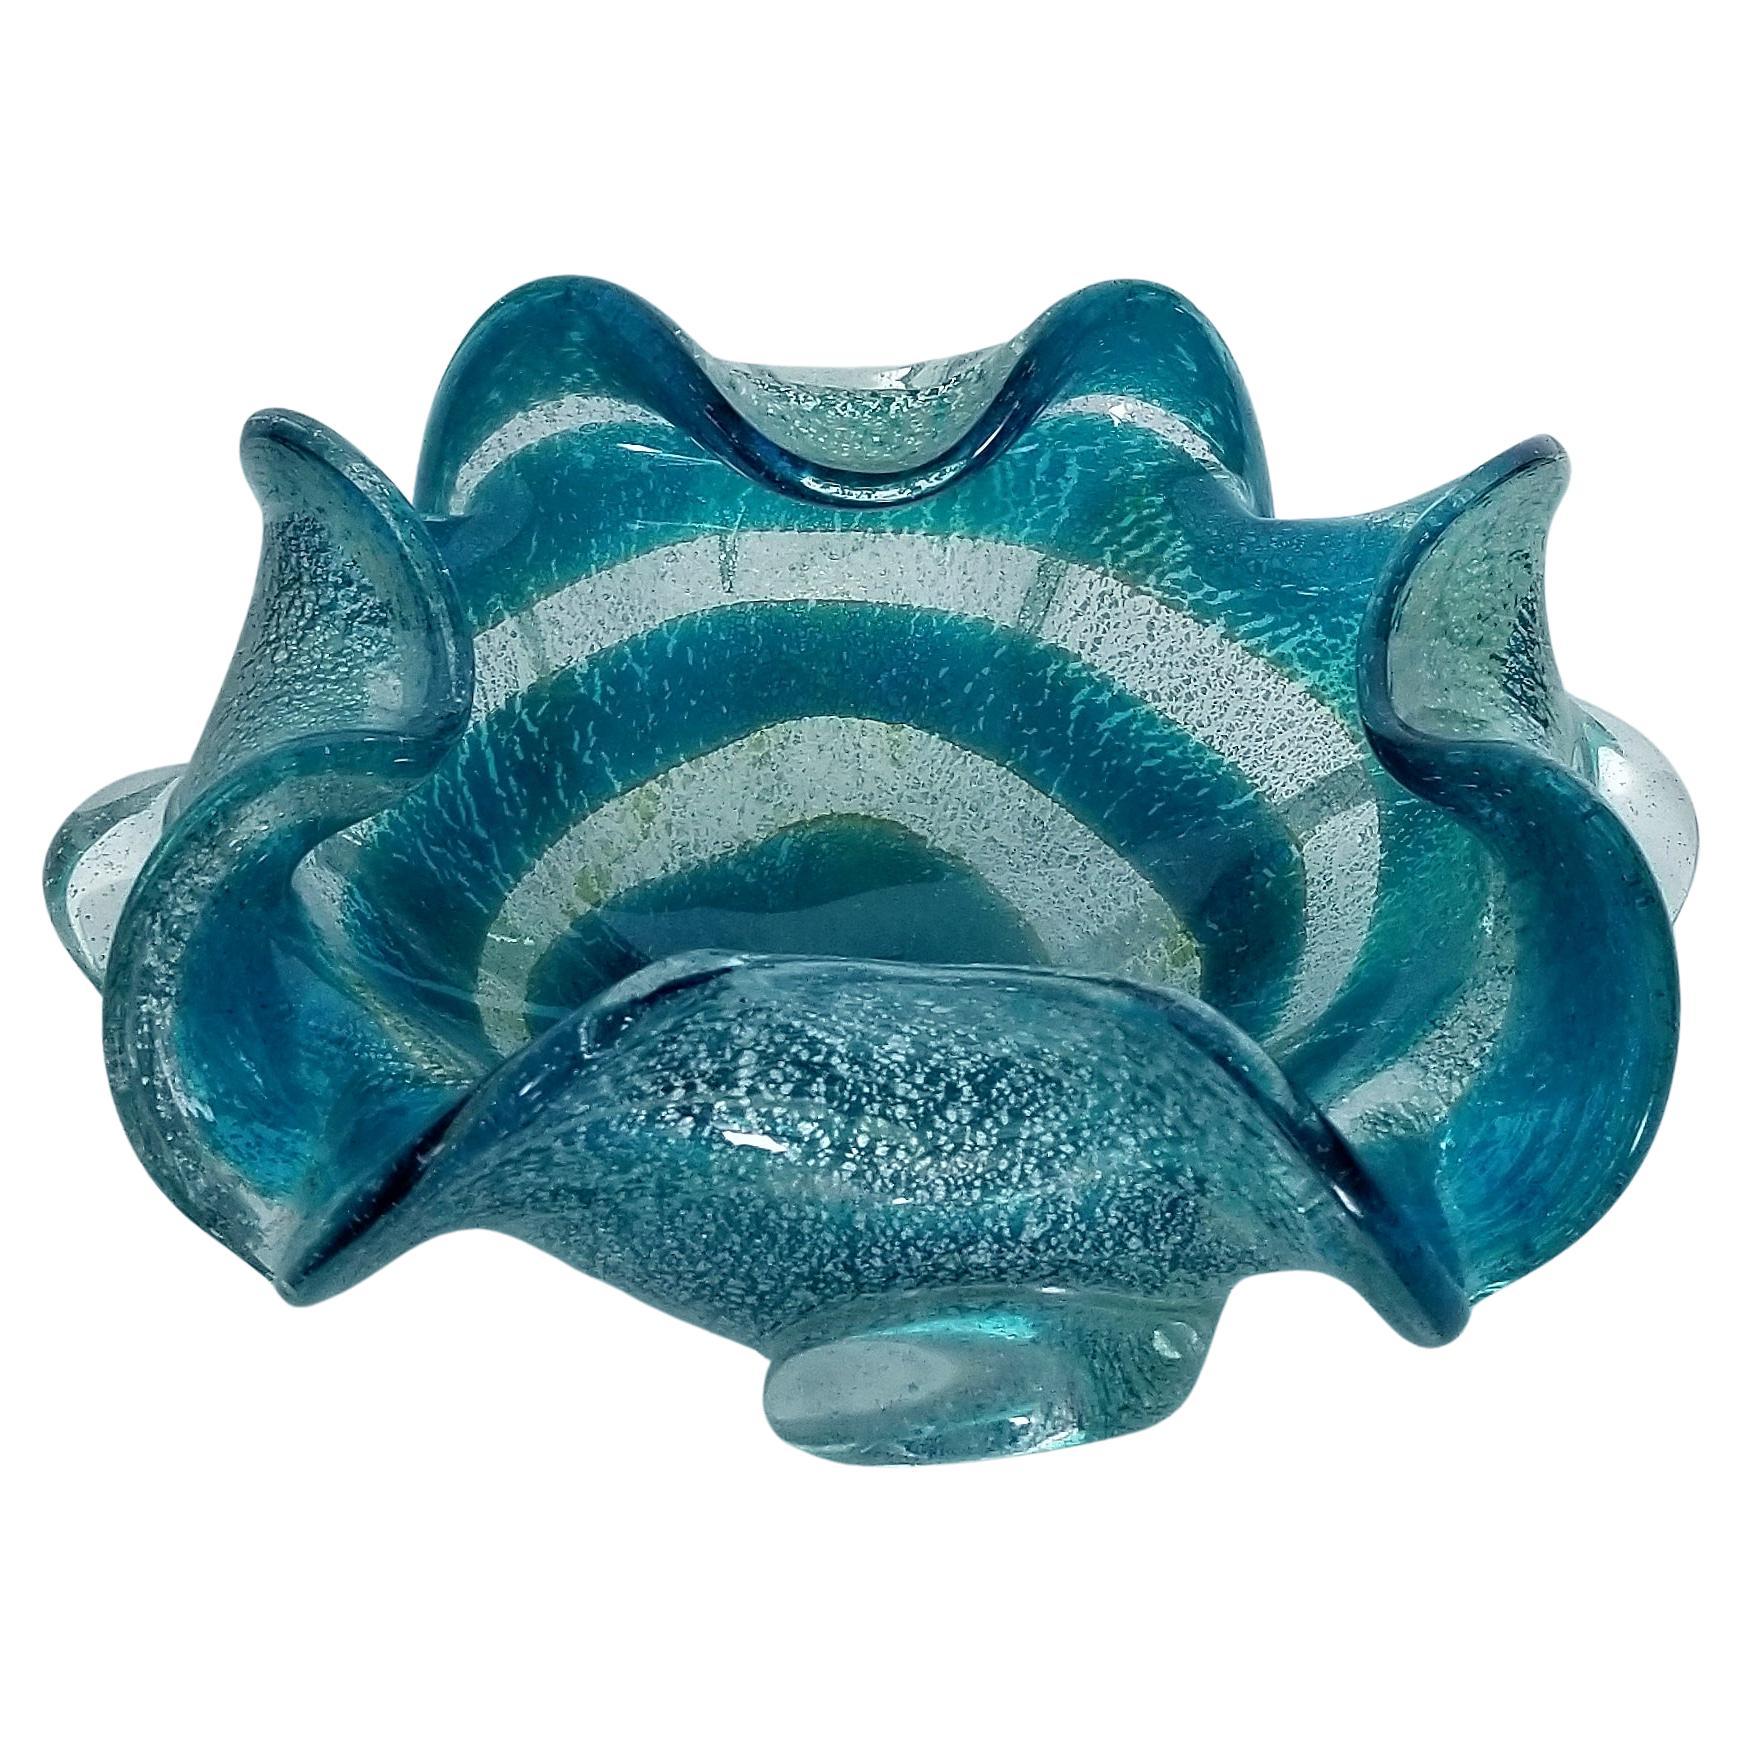 Blue and Silver Murano Glass Ashtray or Catch-all Bowl For Sale 4